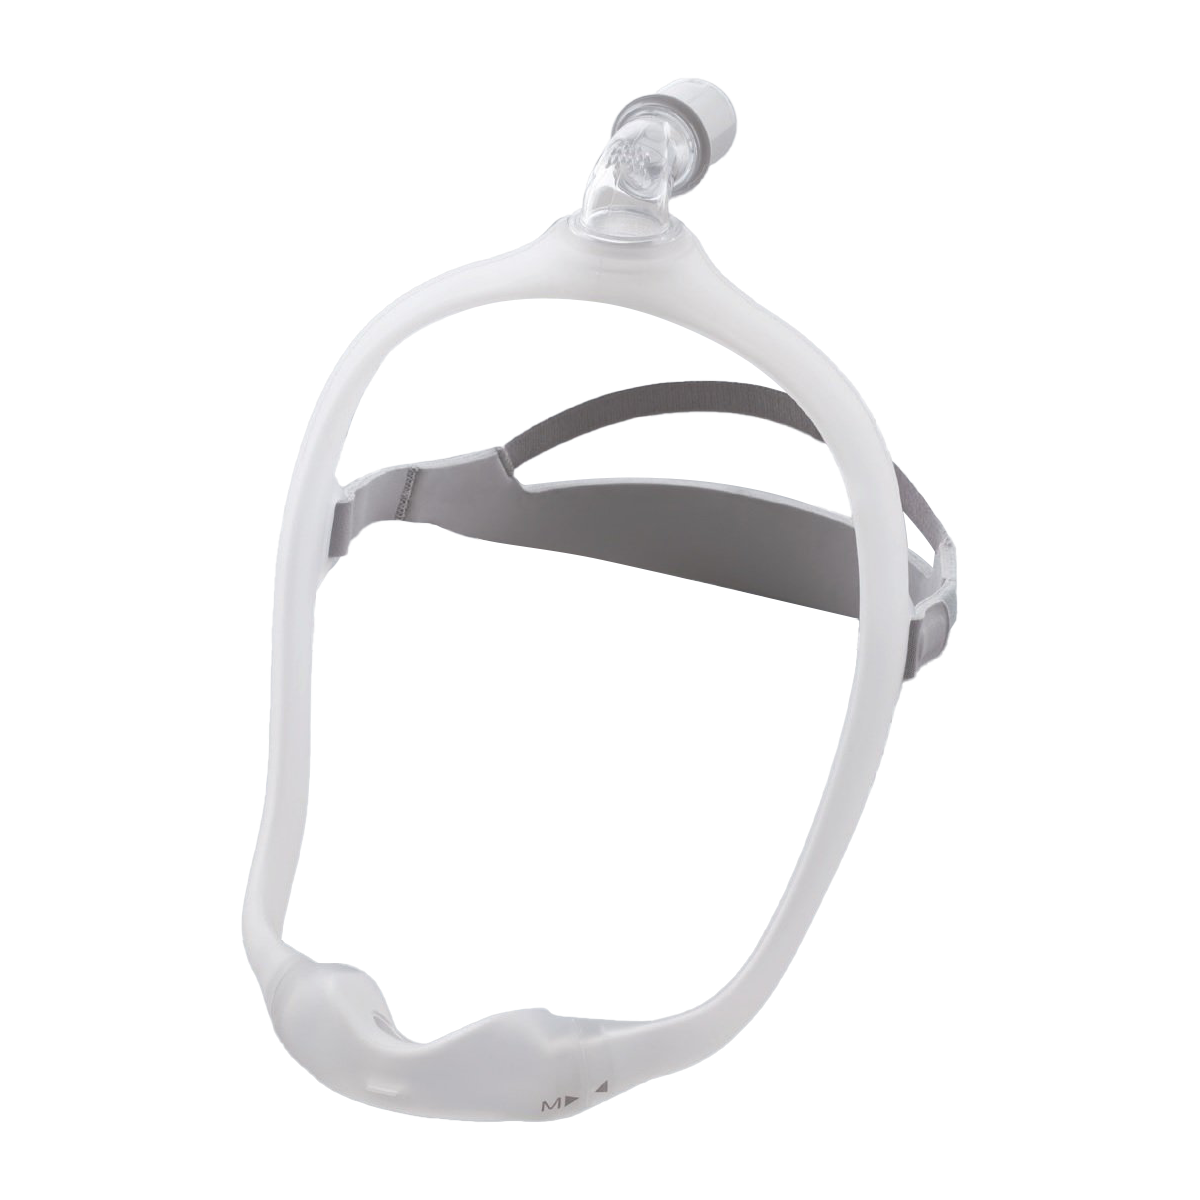 Philips Respironics DreamWear Under-the-Nose Nasal CPAP Mask